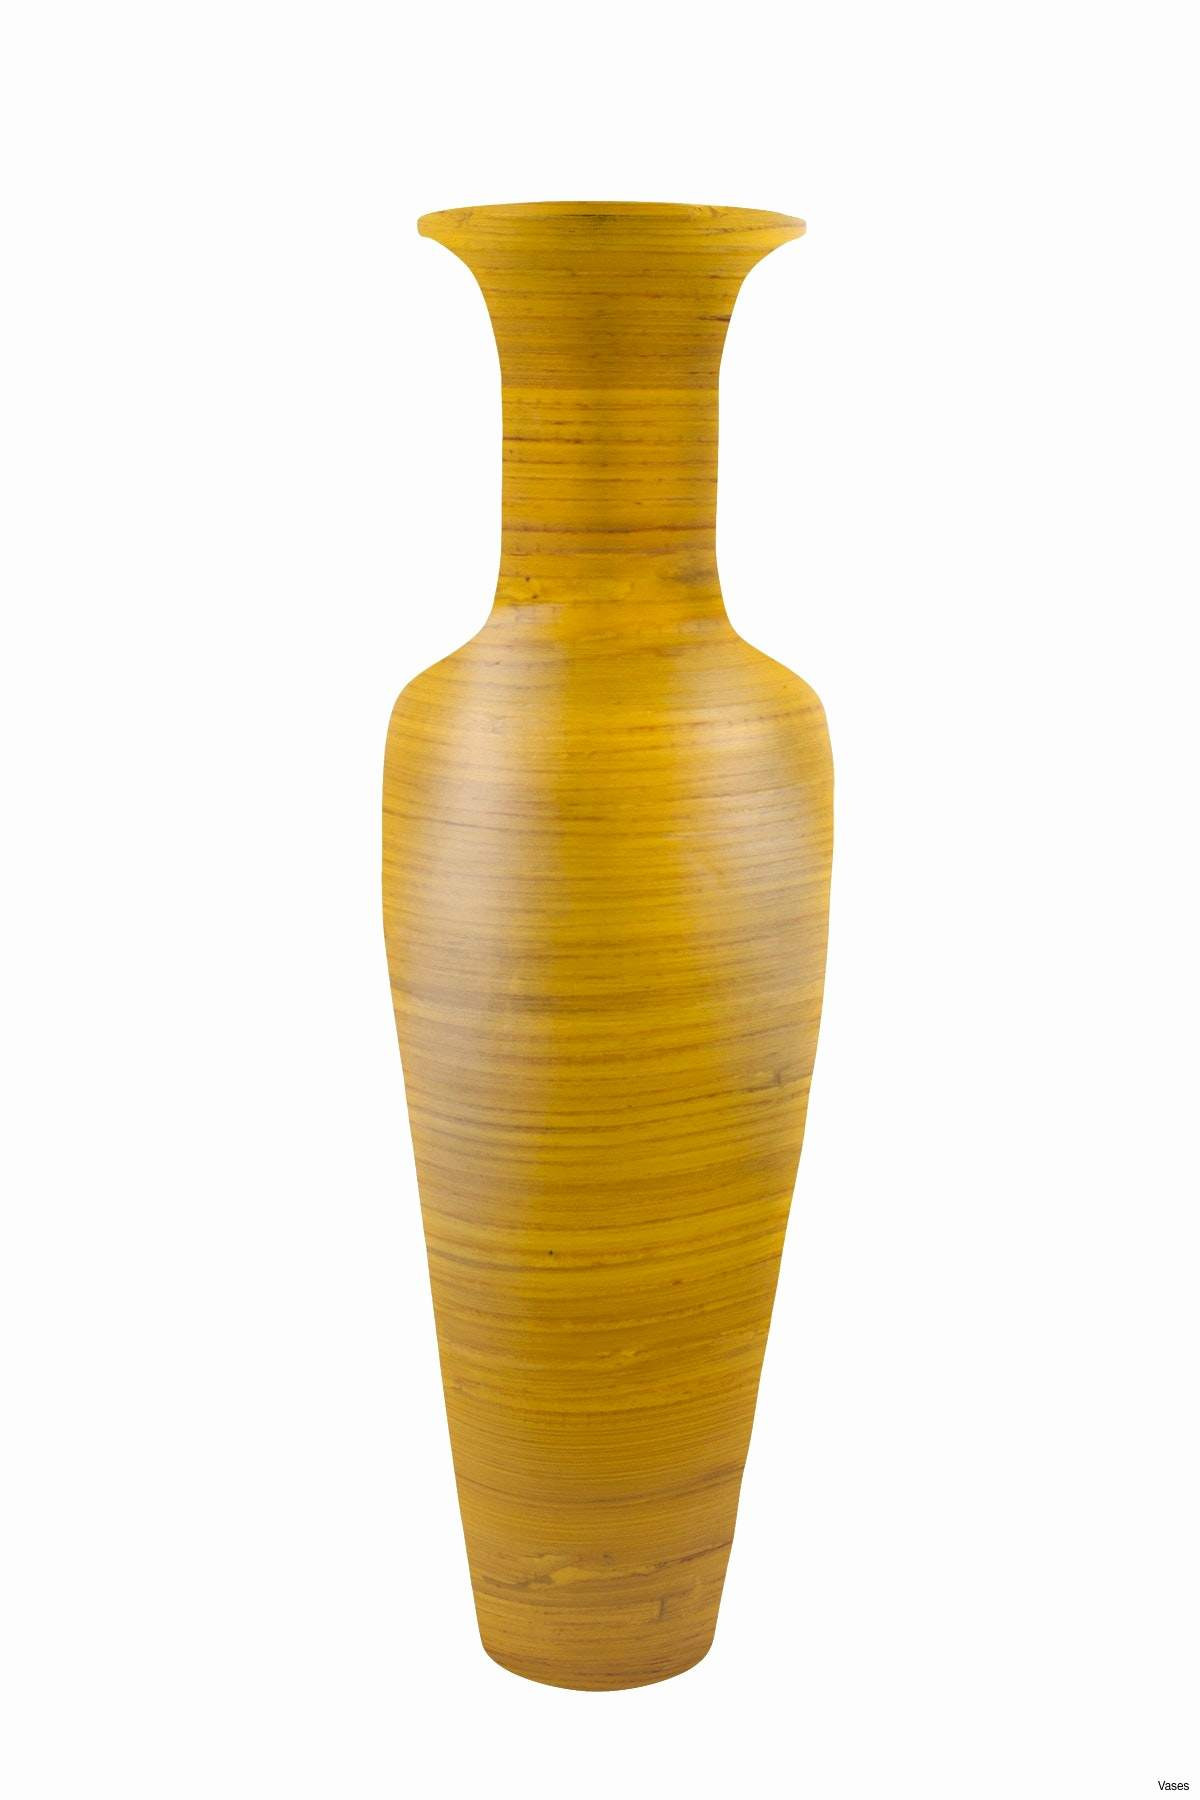 13 attractive Yellow Vases for Sale 2024 free download yellow vases for sale of yellow and grey vase photograph area floor rugs new joaquin gray inside yellow and grey vase photograph area floor rugs new joaquin gray vases set 3 2h pottery